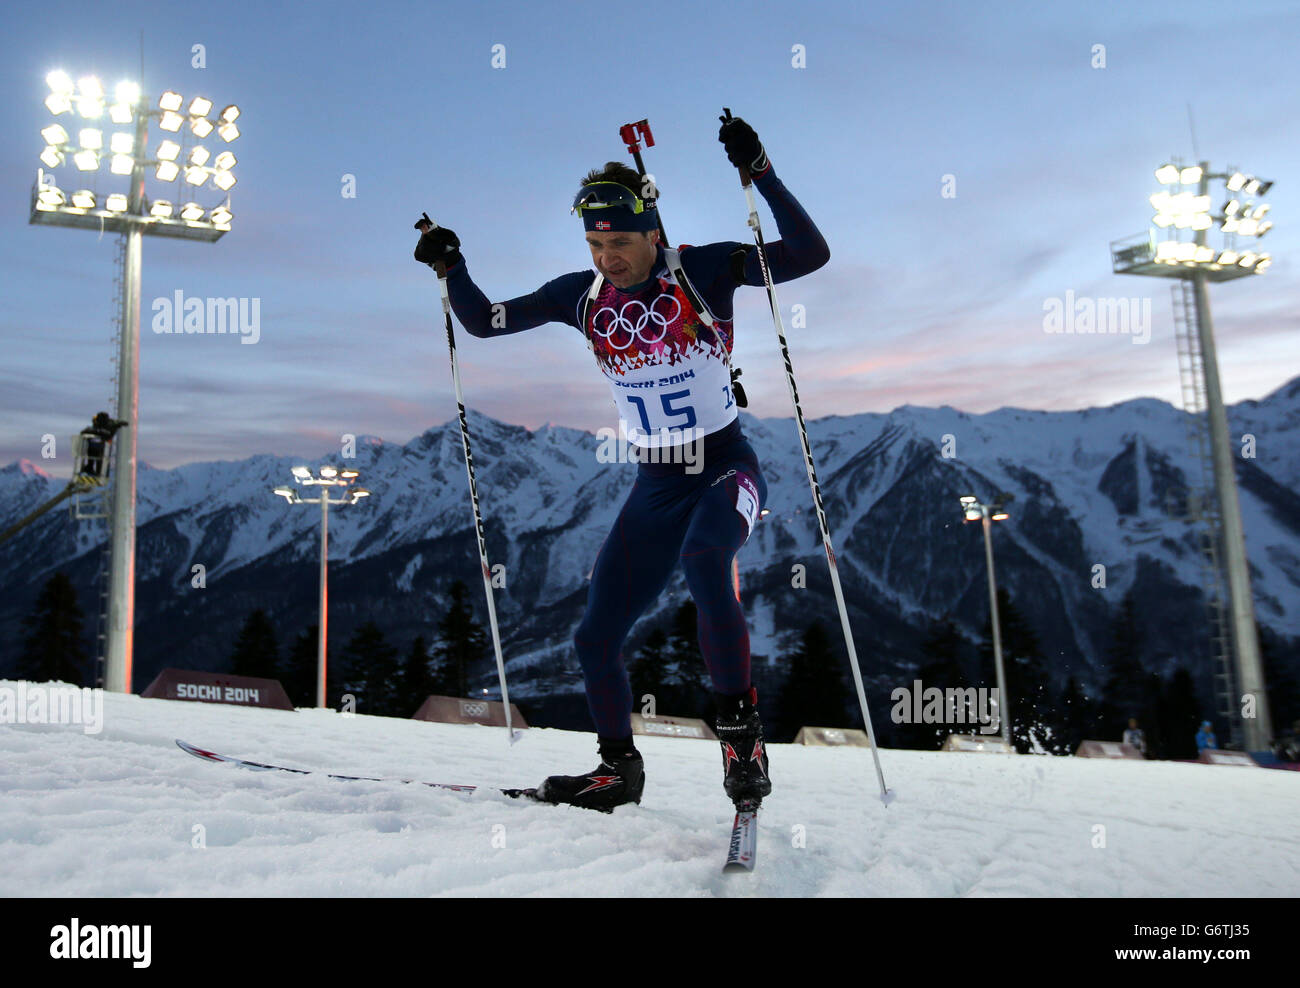 Norway's Ole Einar Bjoerndalen during the Men's 20km Individual Biathlon at the Laura Cross-Country Ski and Biathlon Center during the 2014 Sochi Olympic Games in Krasnaya Polyana, Russia. Stock Photo